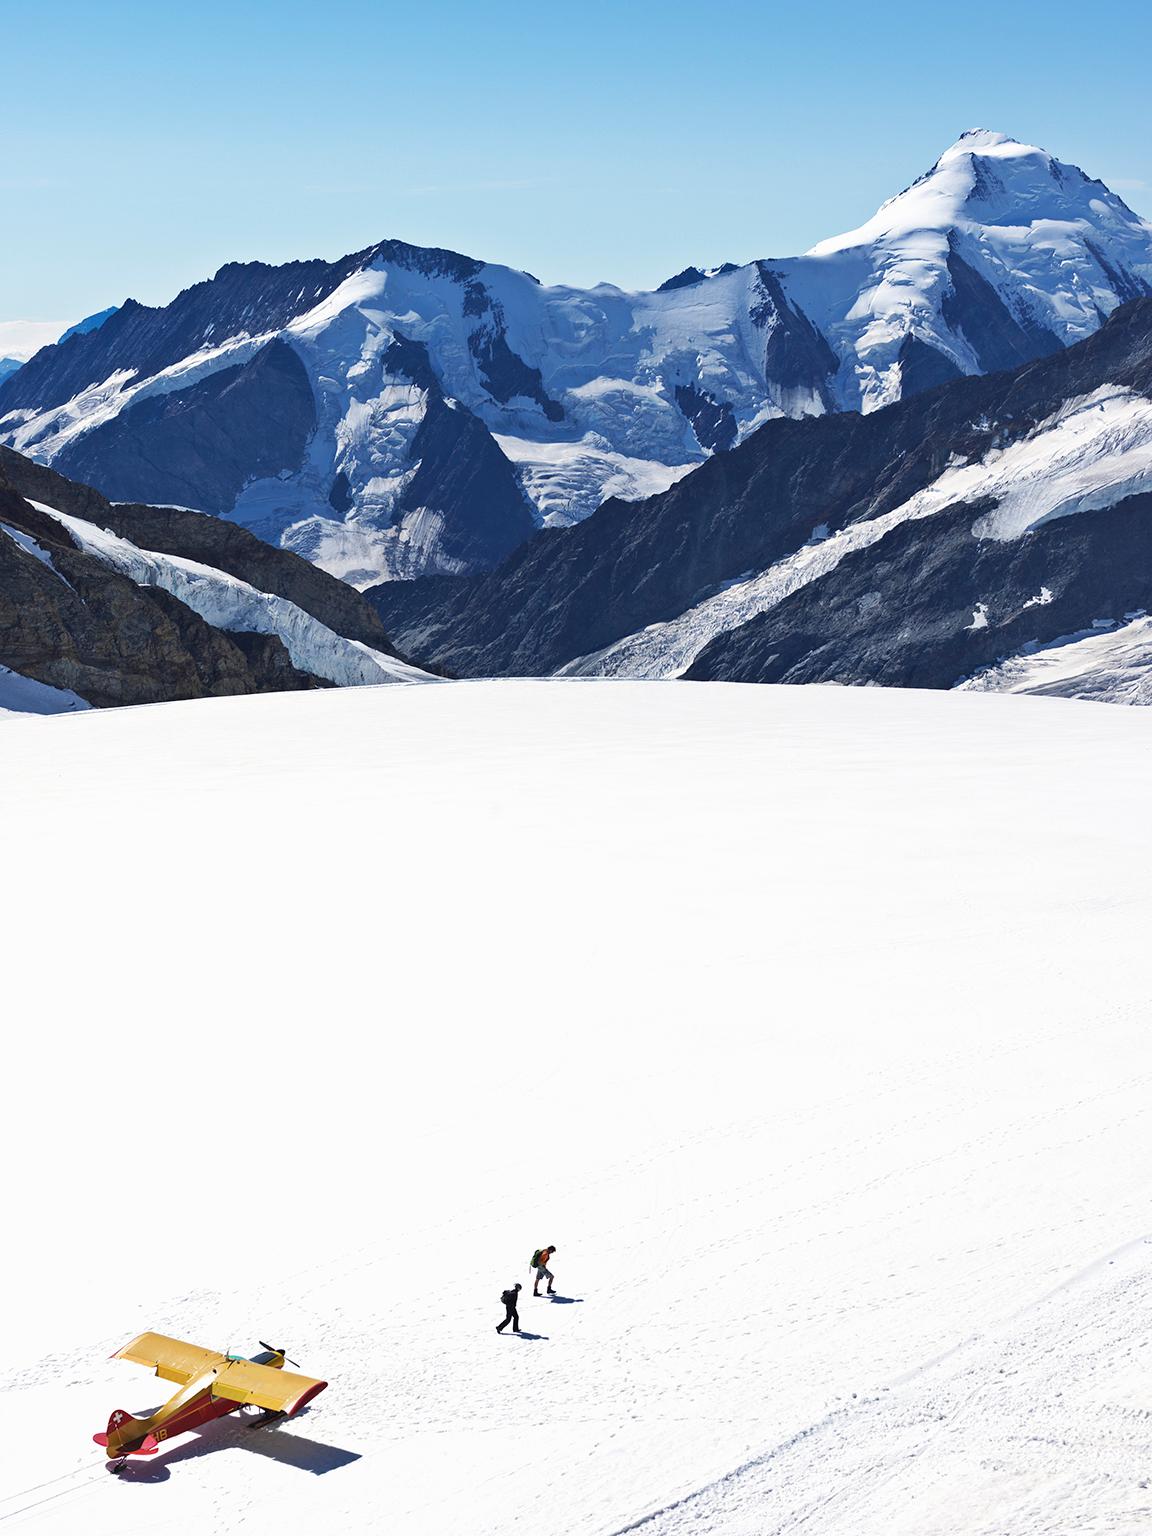 
Switzerland Jungfraujoch-Top of Europe. Airplane on glacier with mountains in background and two people walking away. The Great Aletsch Glacier. Creation Year 2008, Archival Pigment Print 18